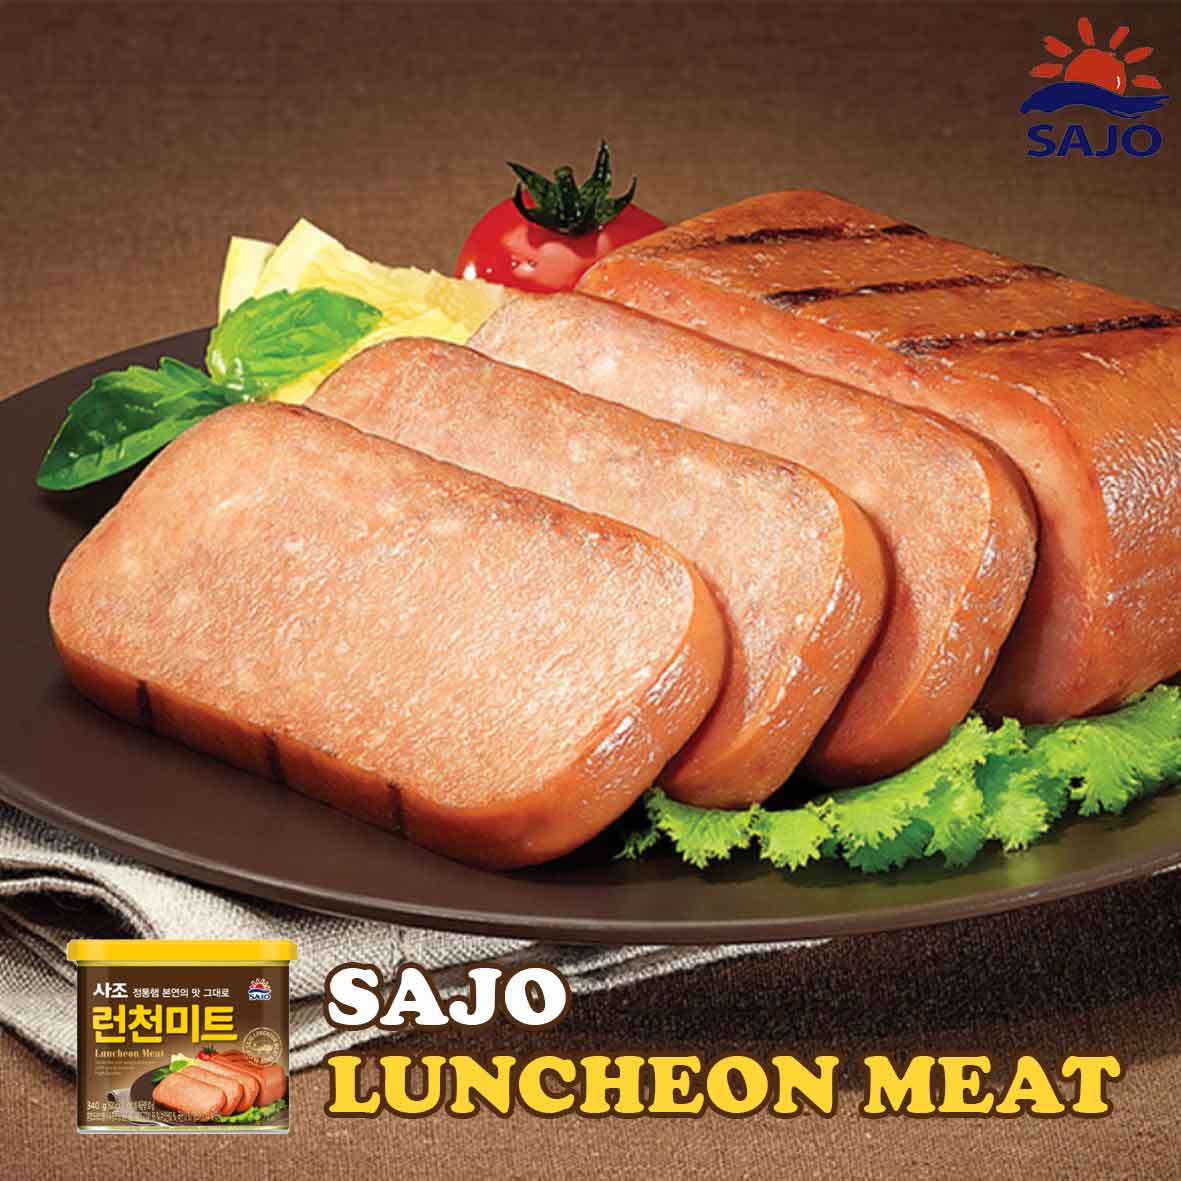 sajo-luncheon-meat-main-new